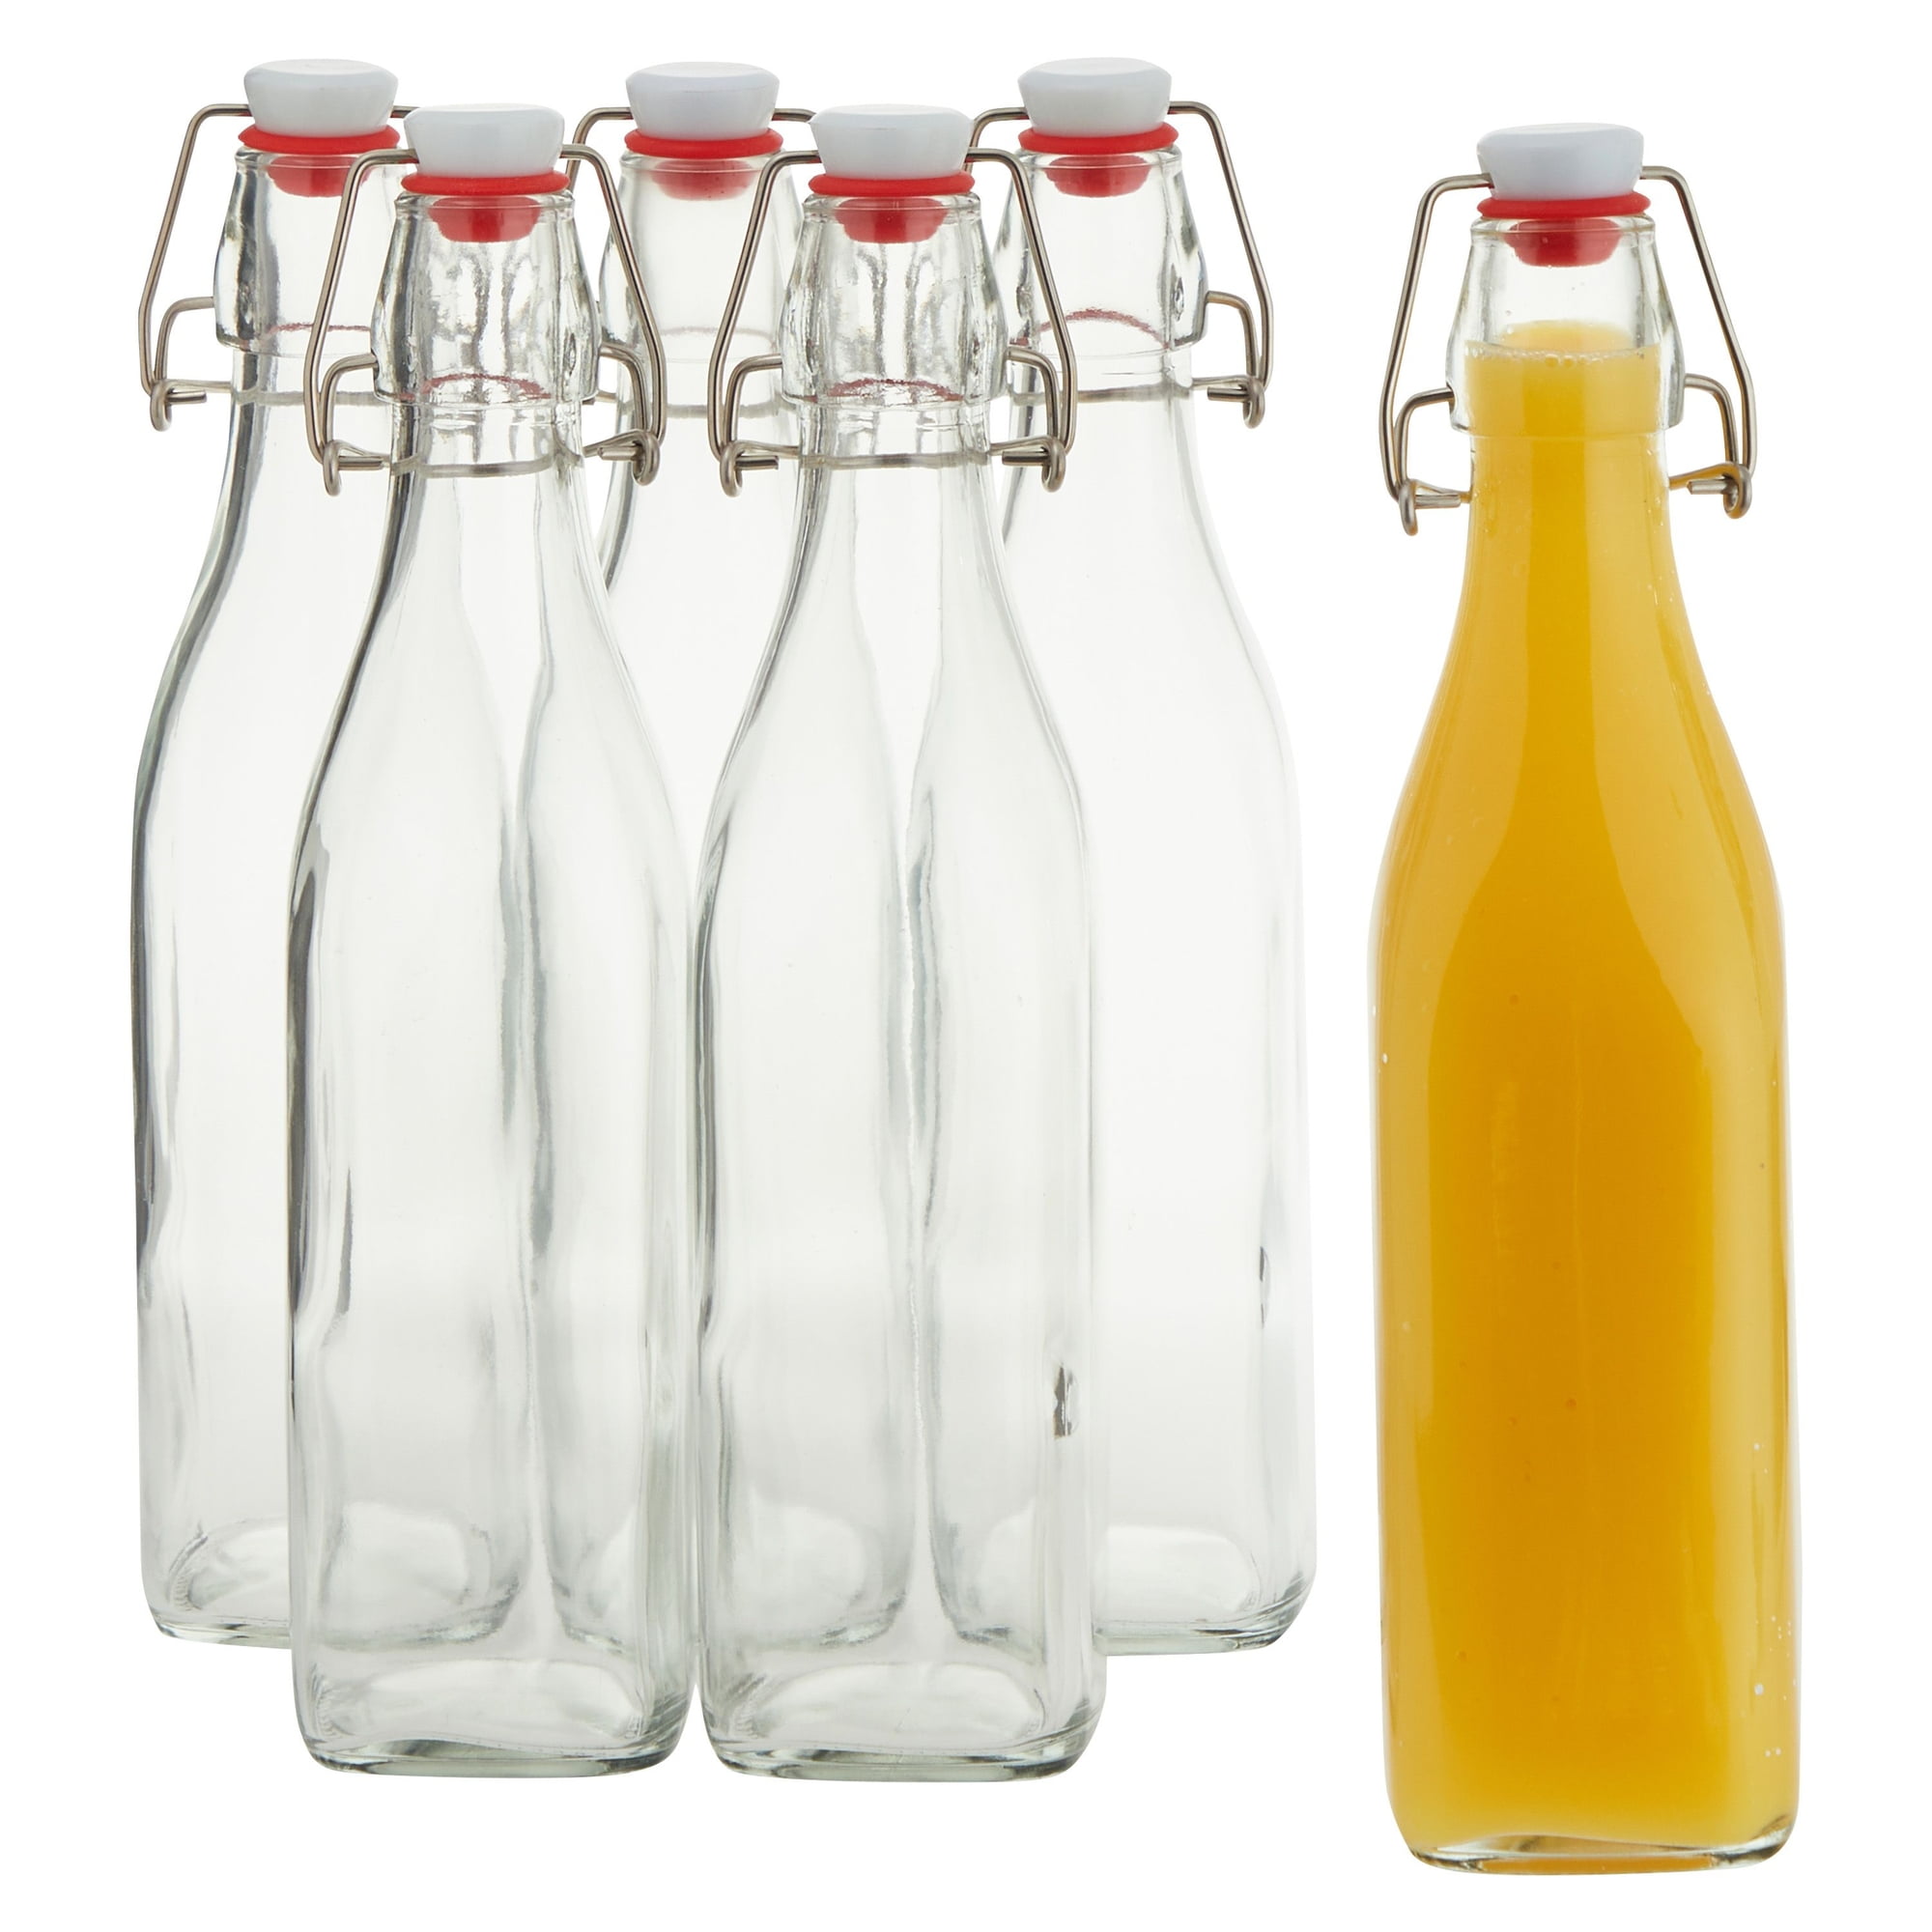 6 Pack 33 oz. Glass Bottles with Swing Top Stoppers, Bottle Brush, Fun